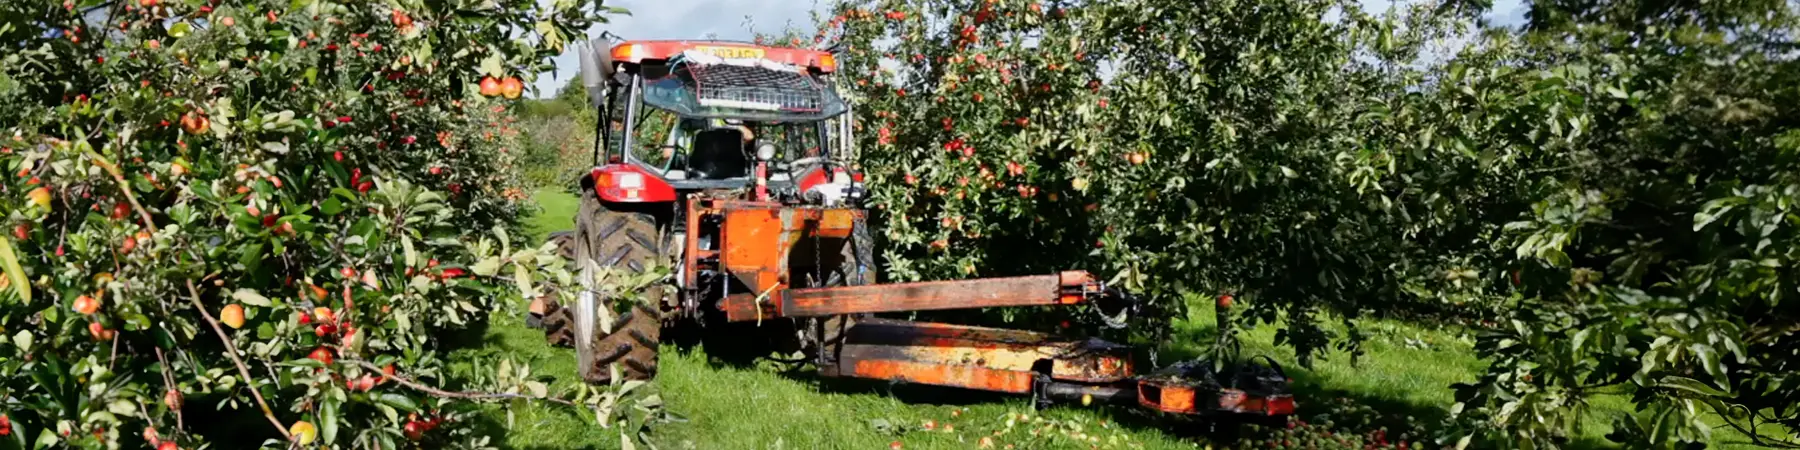 tractor picking apples from cider orchard